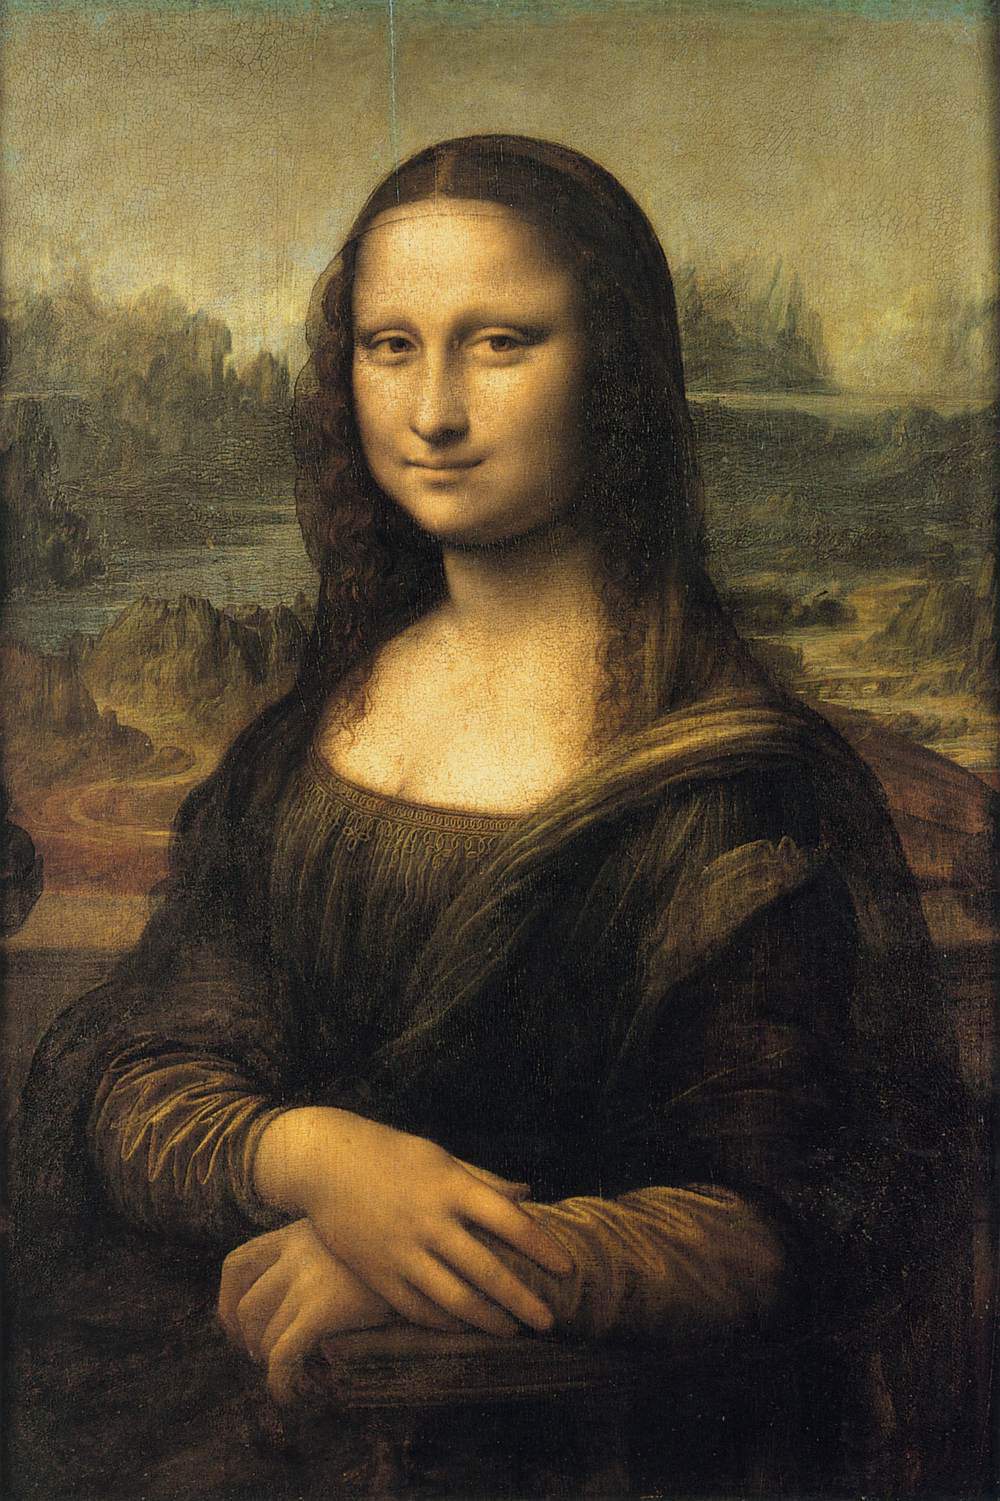 The Mona Lisa will not move from the Louvre: the decision of the director of the Paris museum